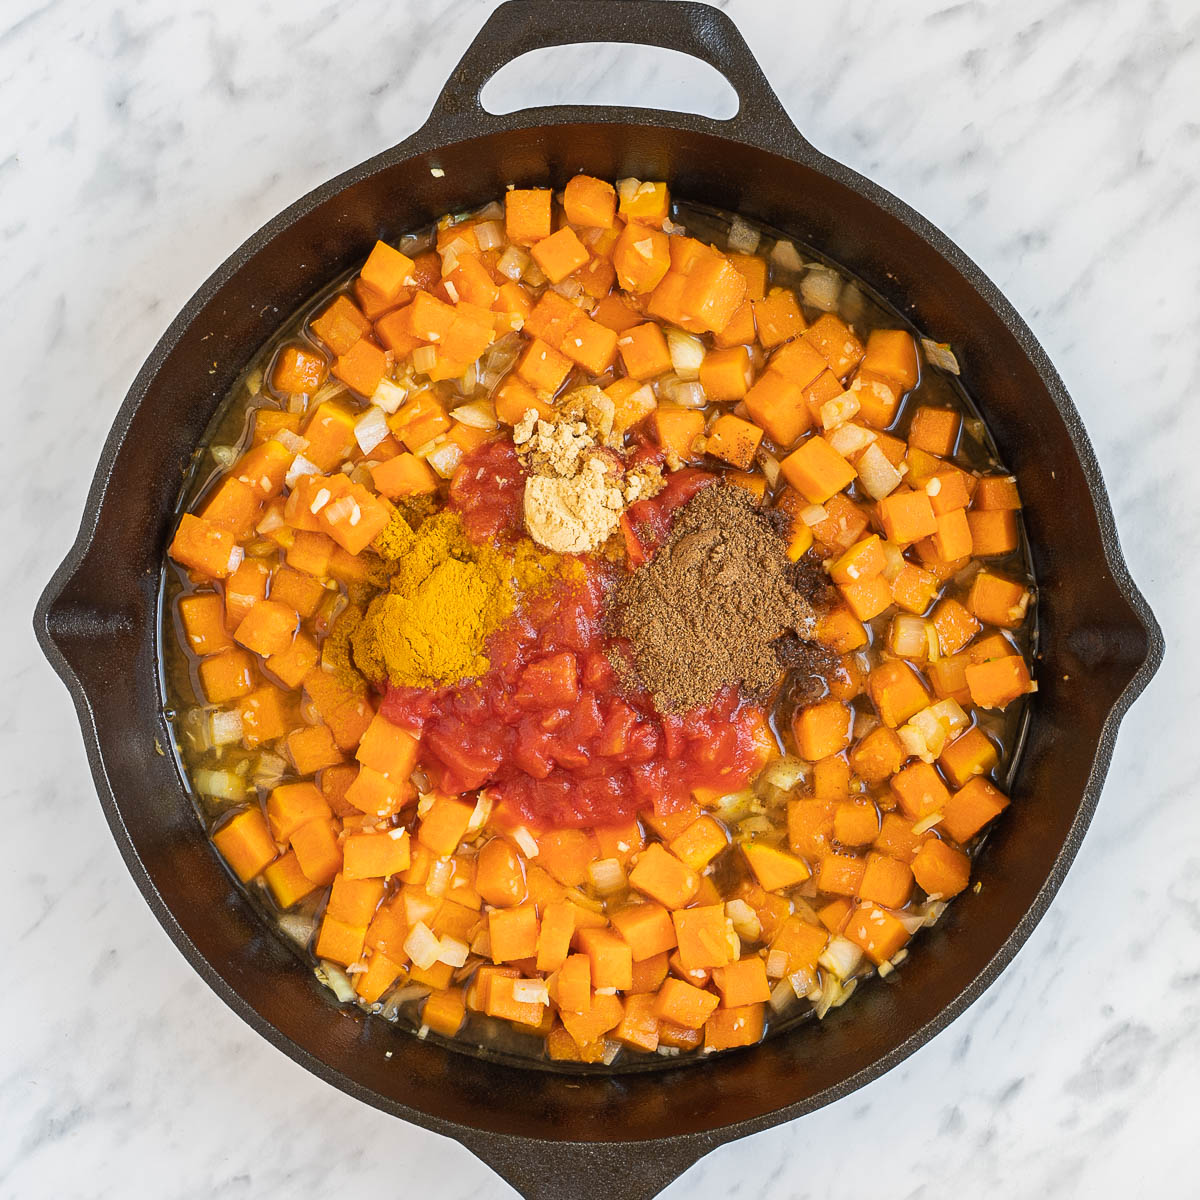 Cast iron skillet with orange squash cubes and small heaps of different spices